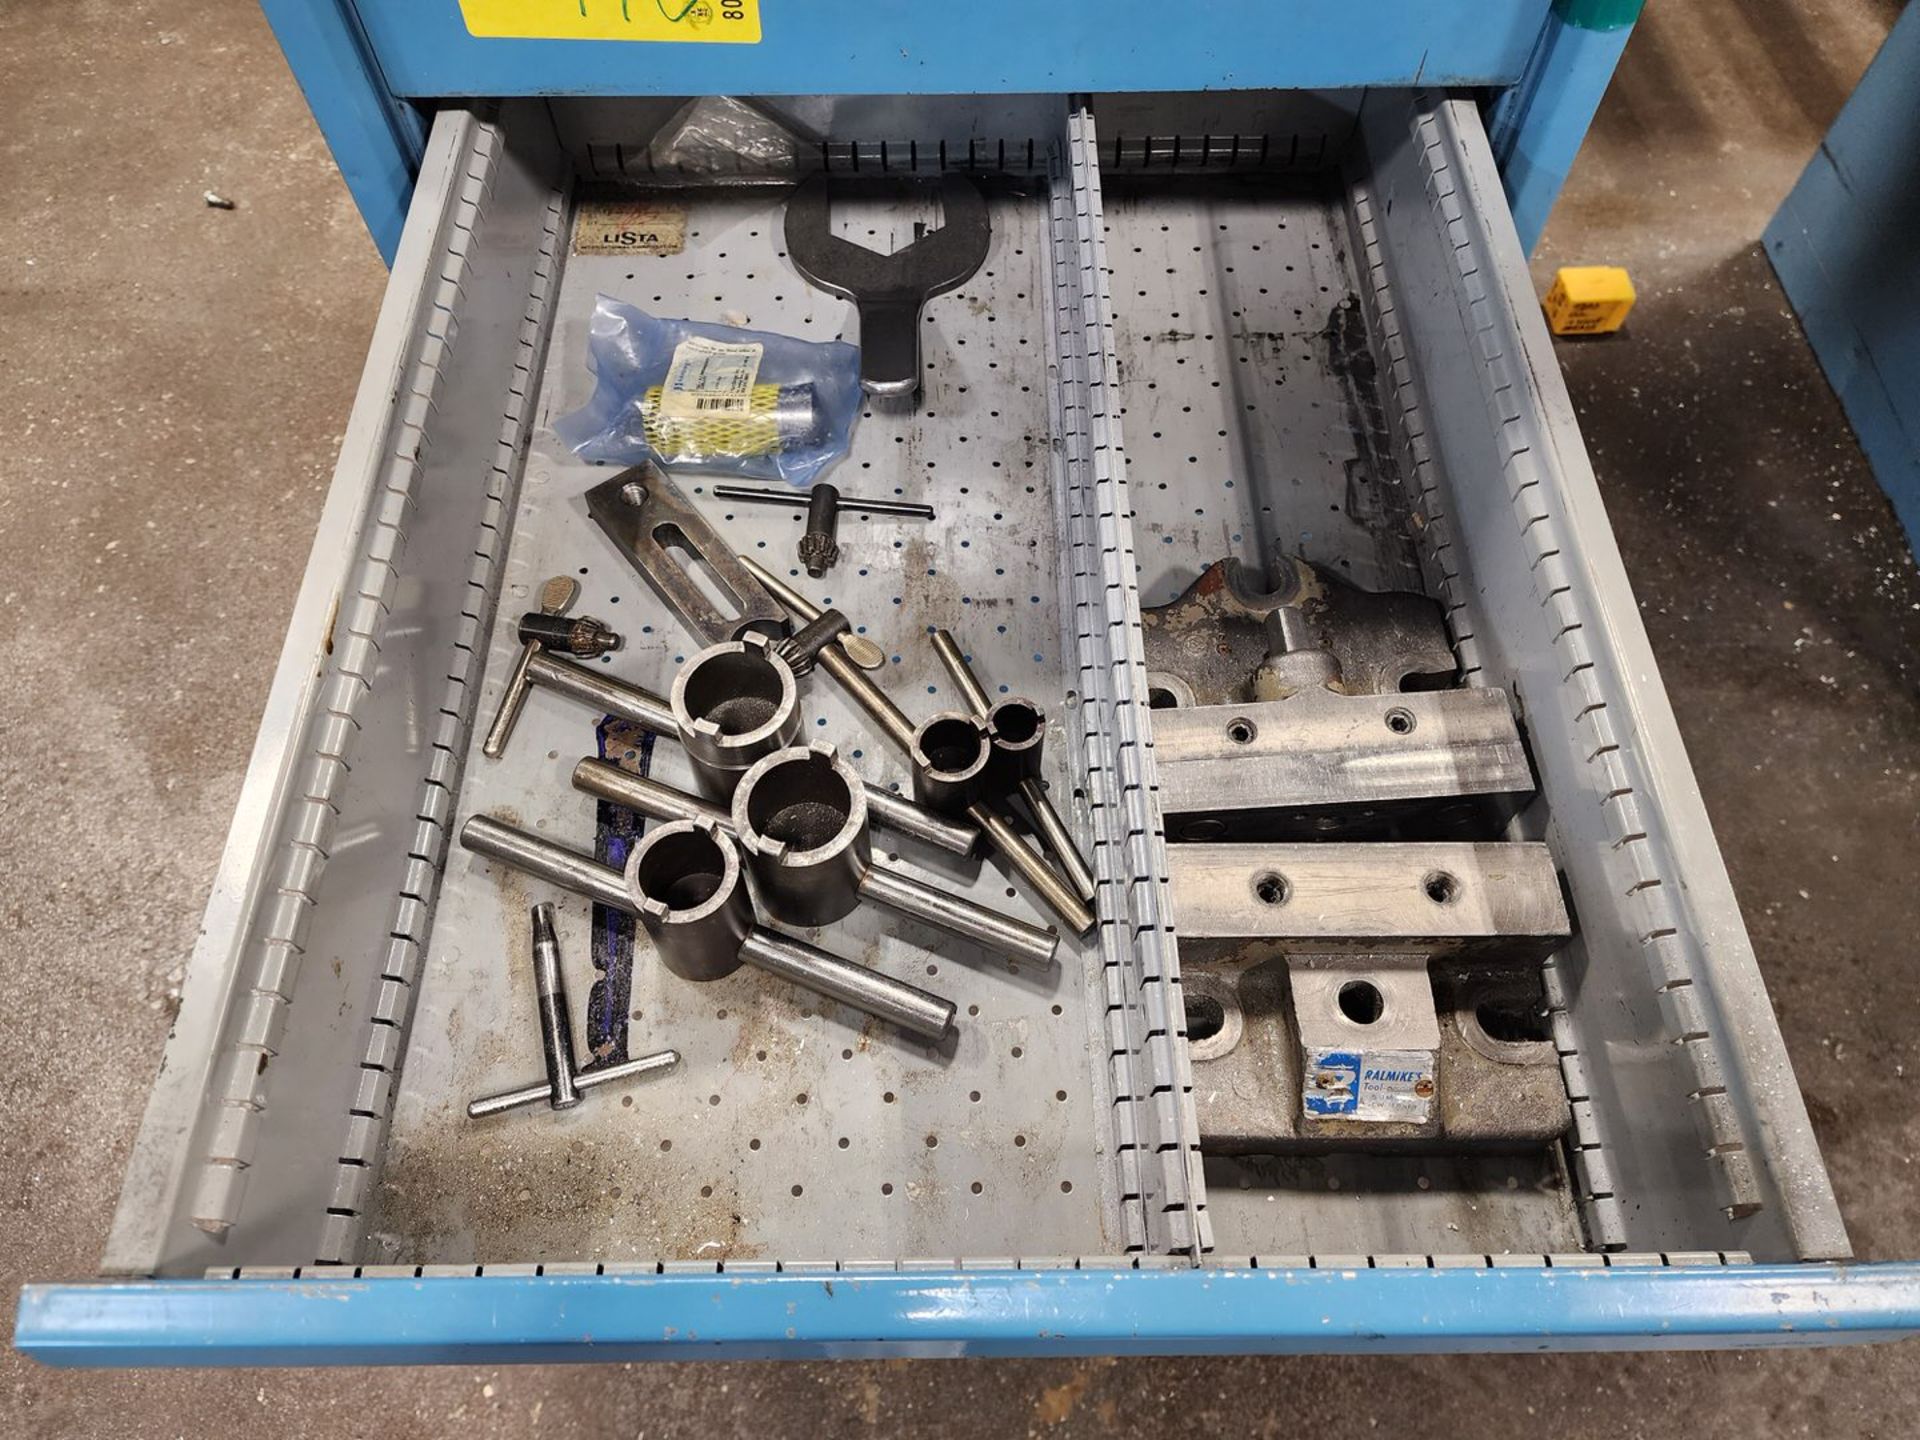 2-Bin Modular Material Cabinet W/ Jig Boring Machine Contents & Other Assorted Contents - Image 16 of 20